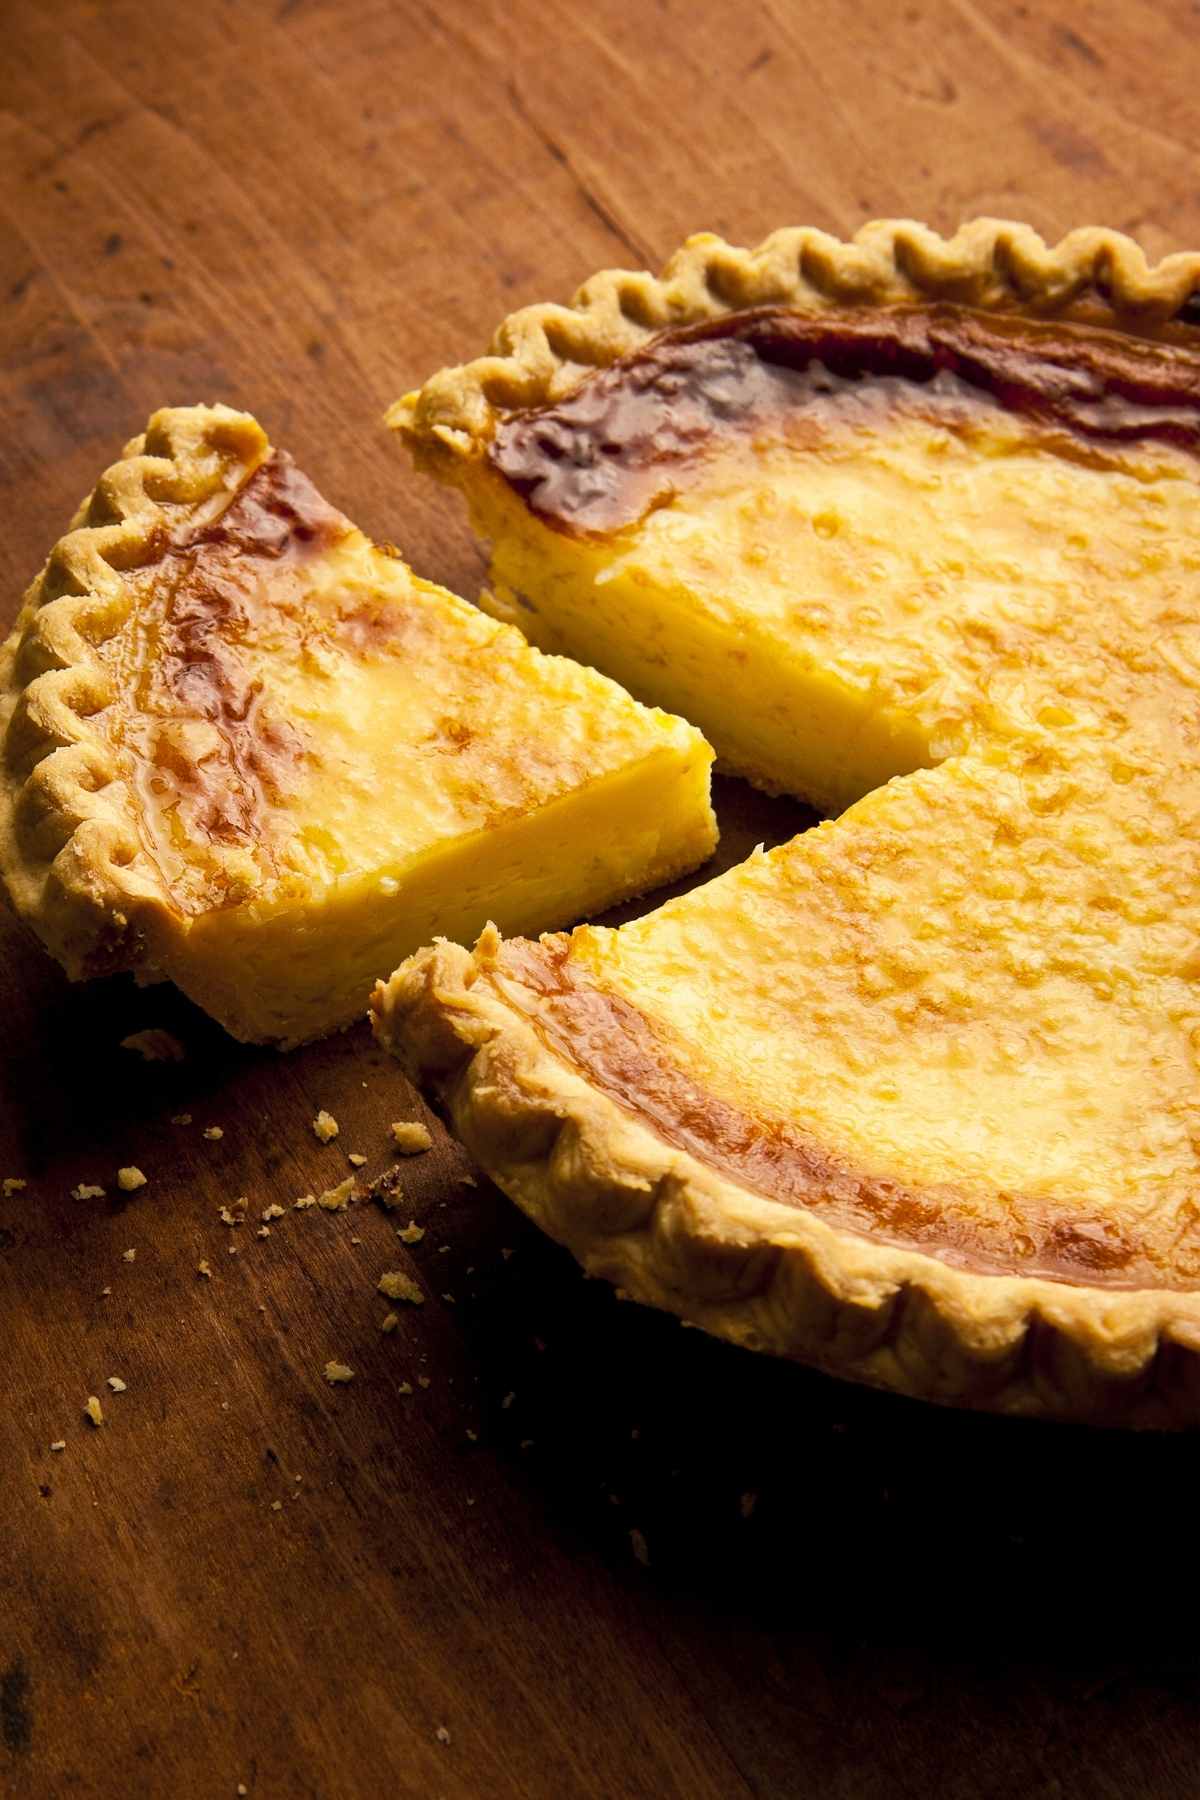 This homemade egg custard pie is creamy and delicious. It’s a Southern classic that’s a welcome addition to any meal.